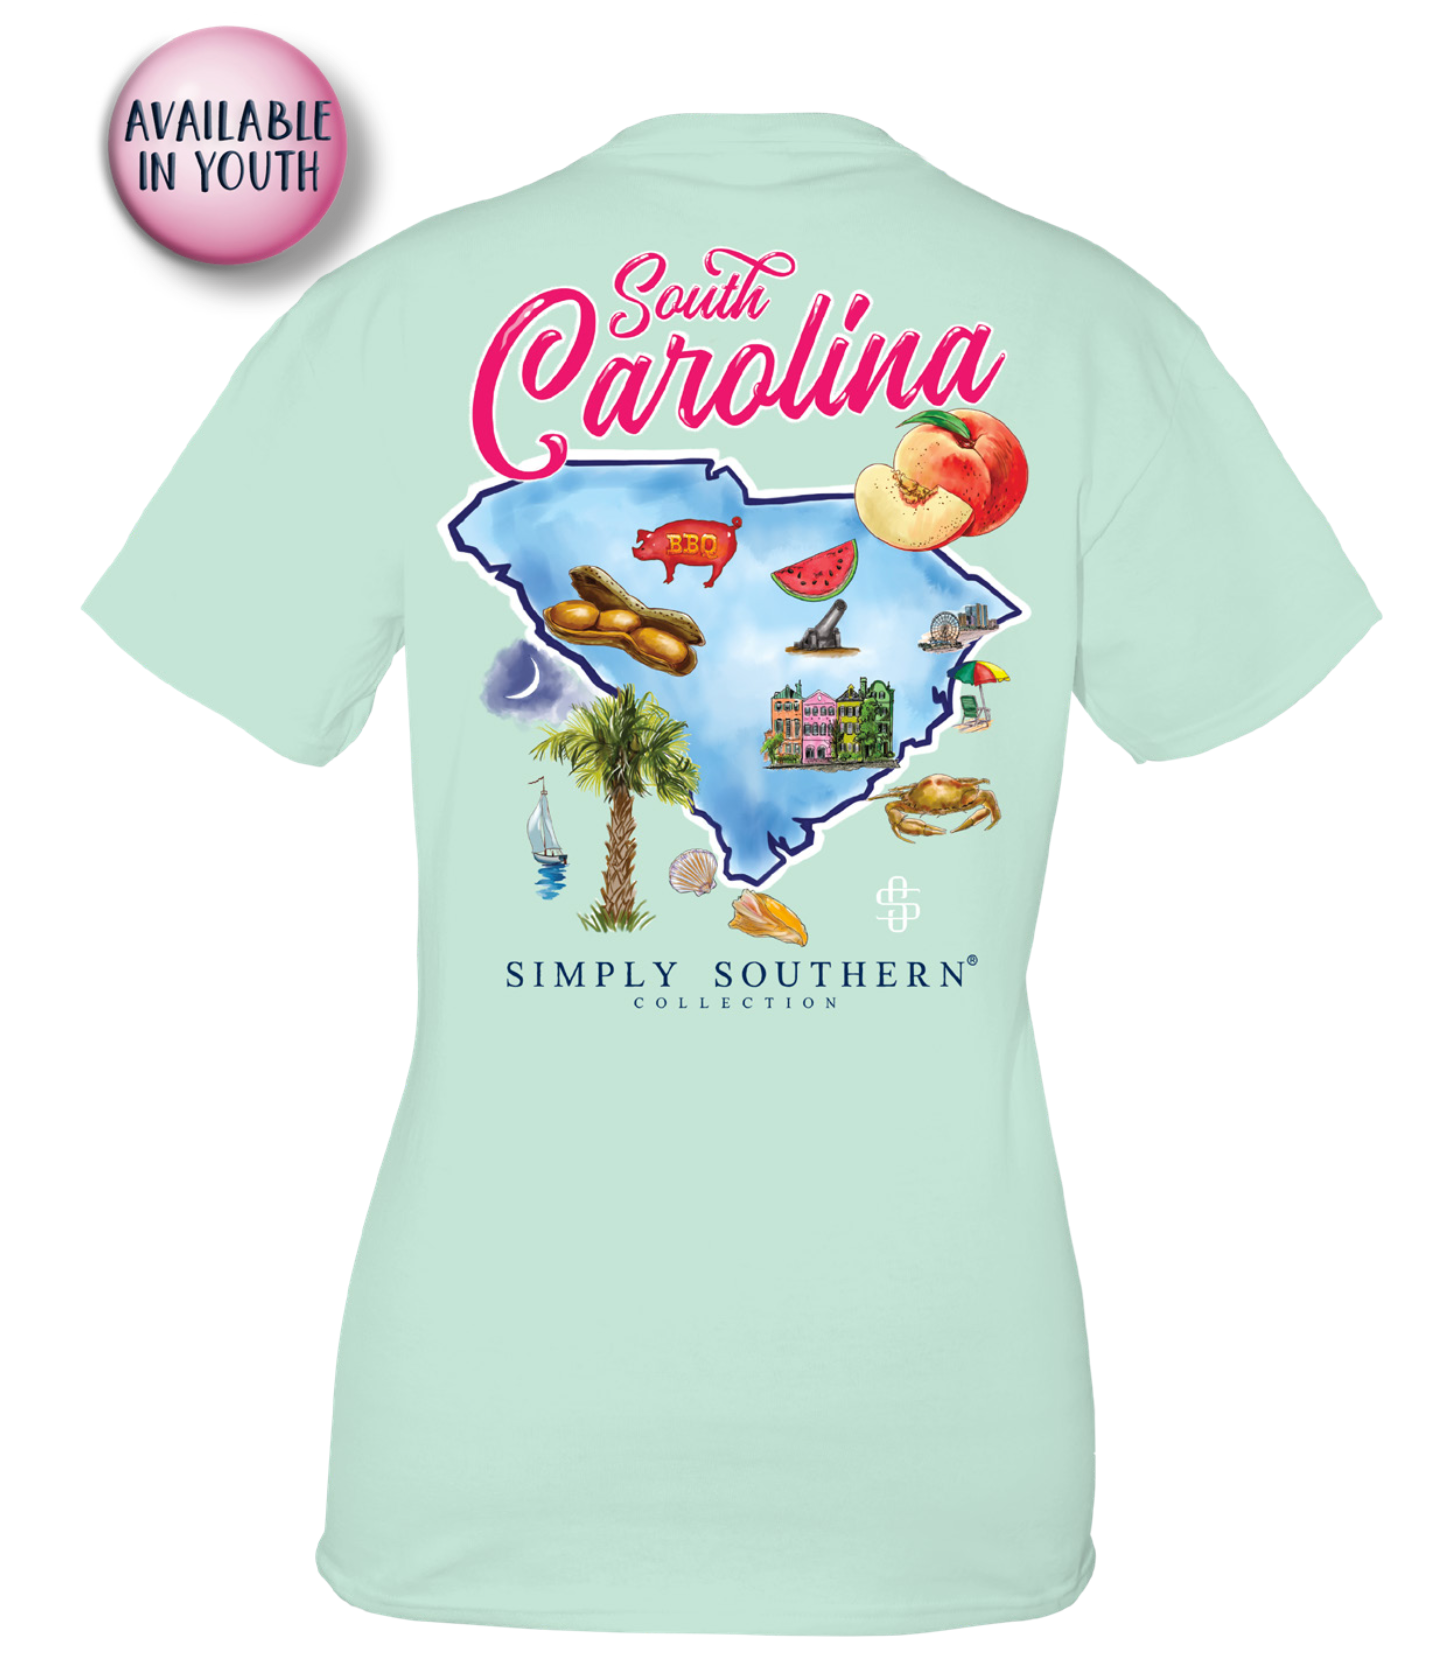 South Carolina State Short Sleeve Tee by Simply Southern